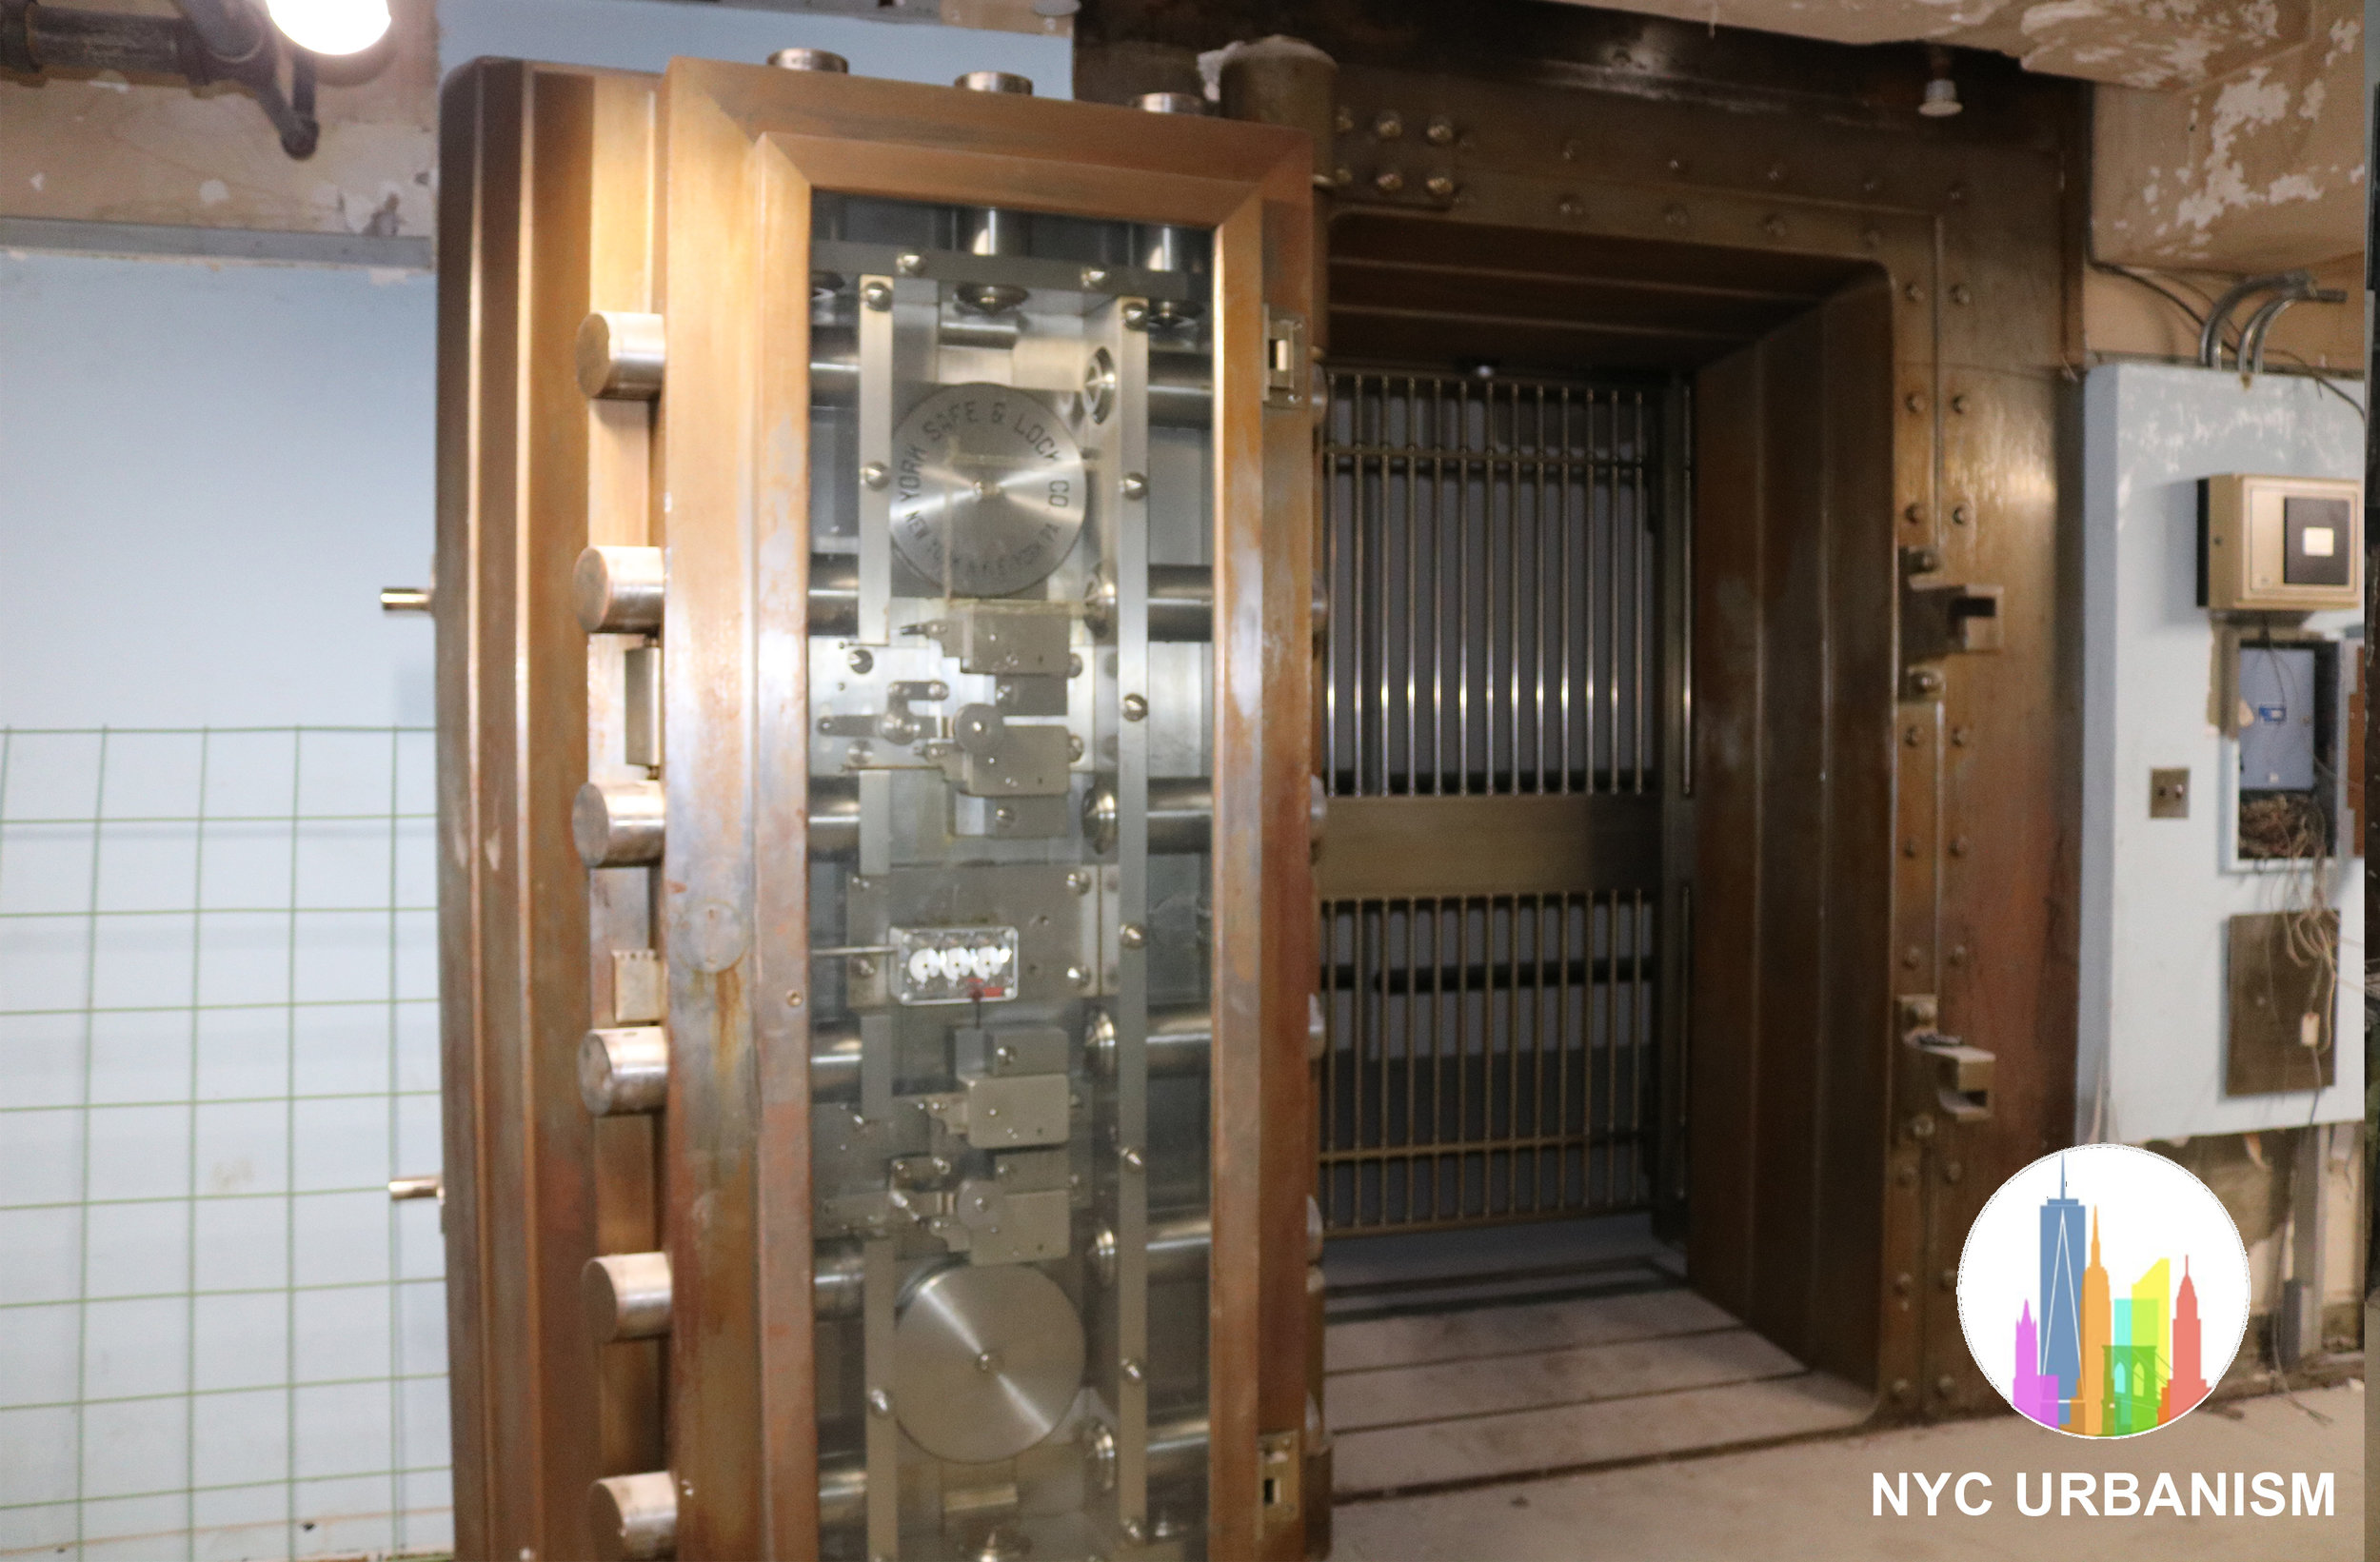 One of 16 bank vaults